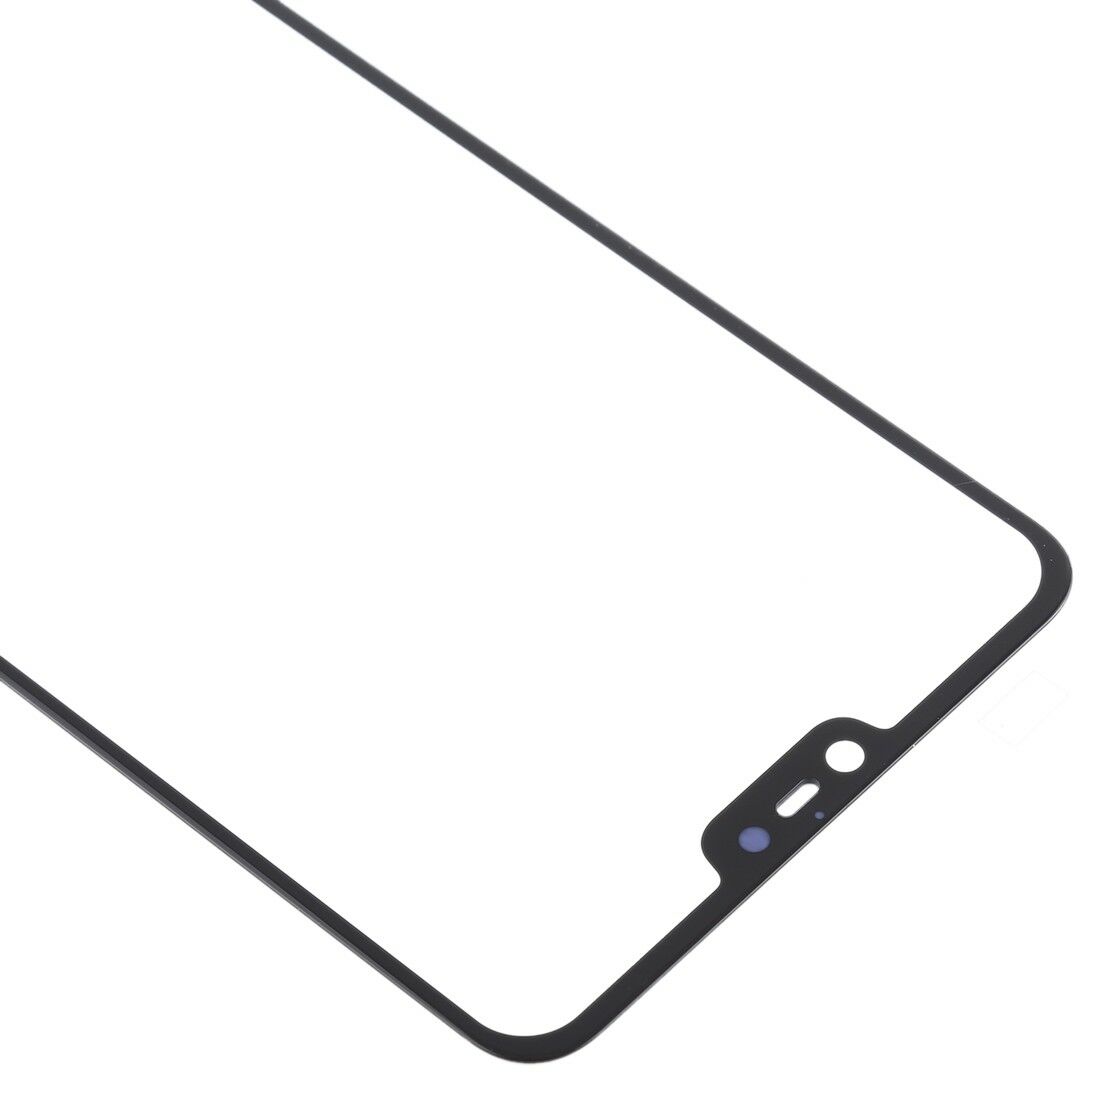 Front Screen Glass Lens Replacement for Xiaomi Mi 8 Lite/Mi 8 Youth (Mi 8X)